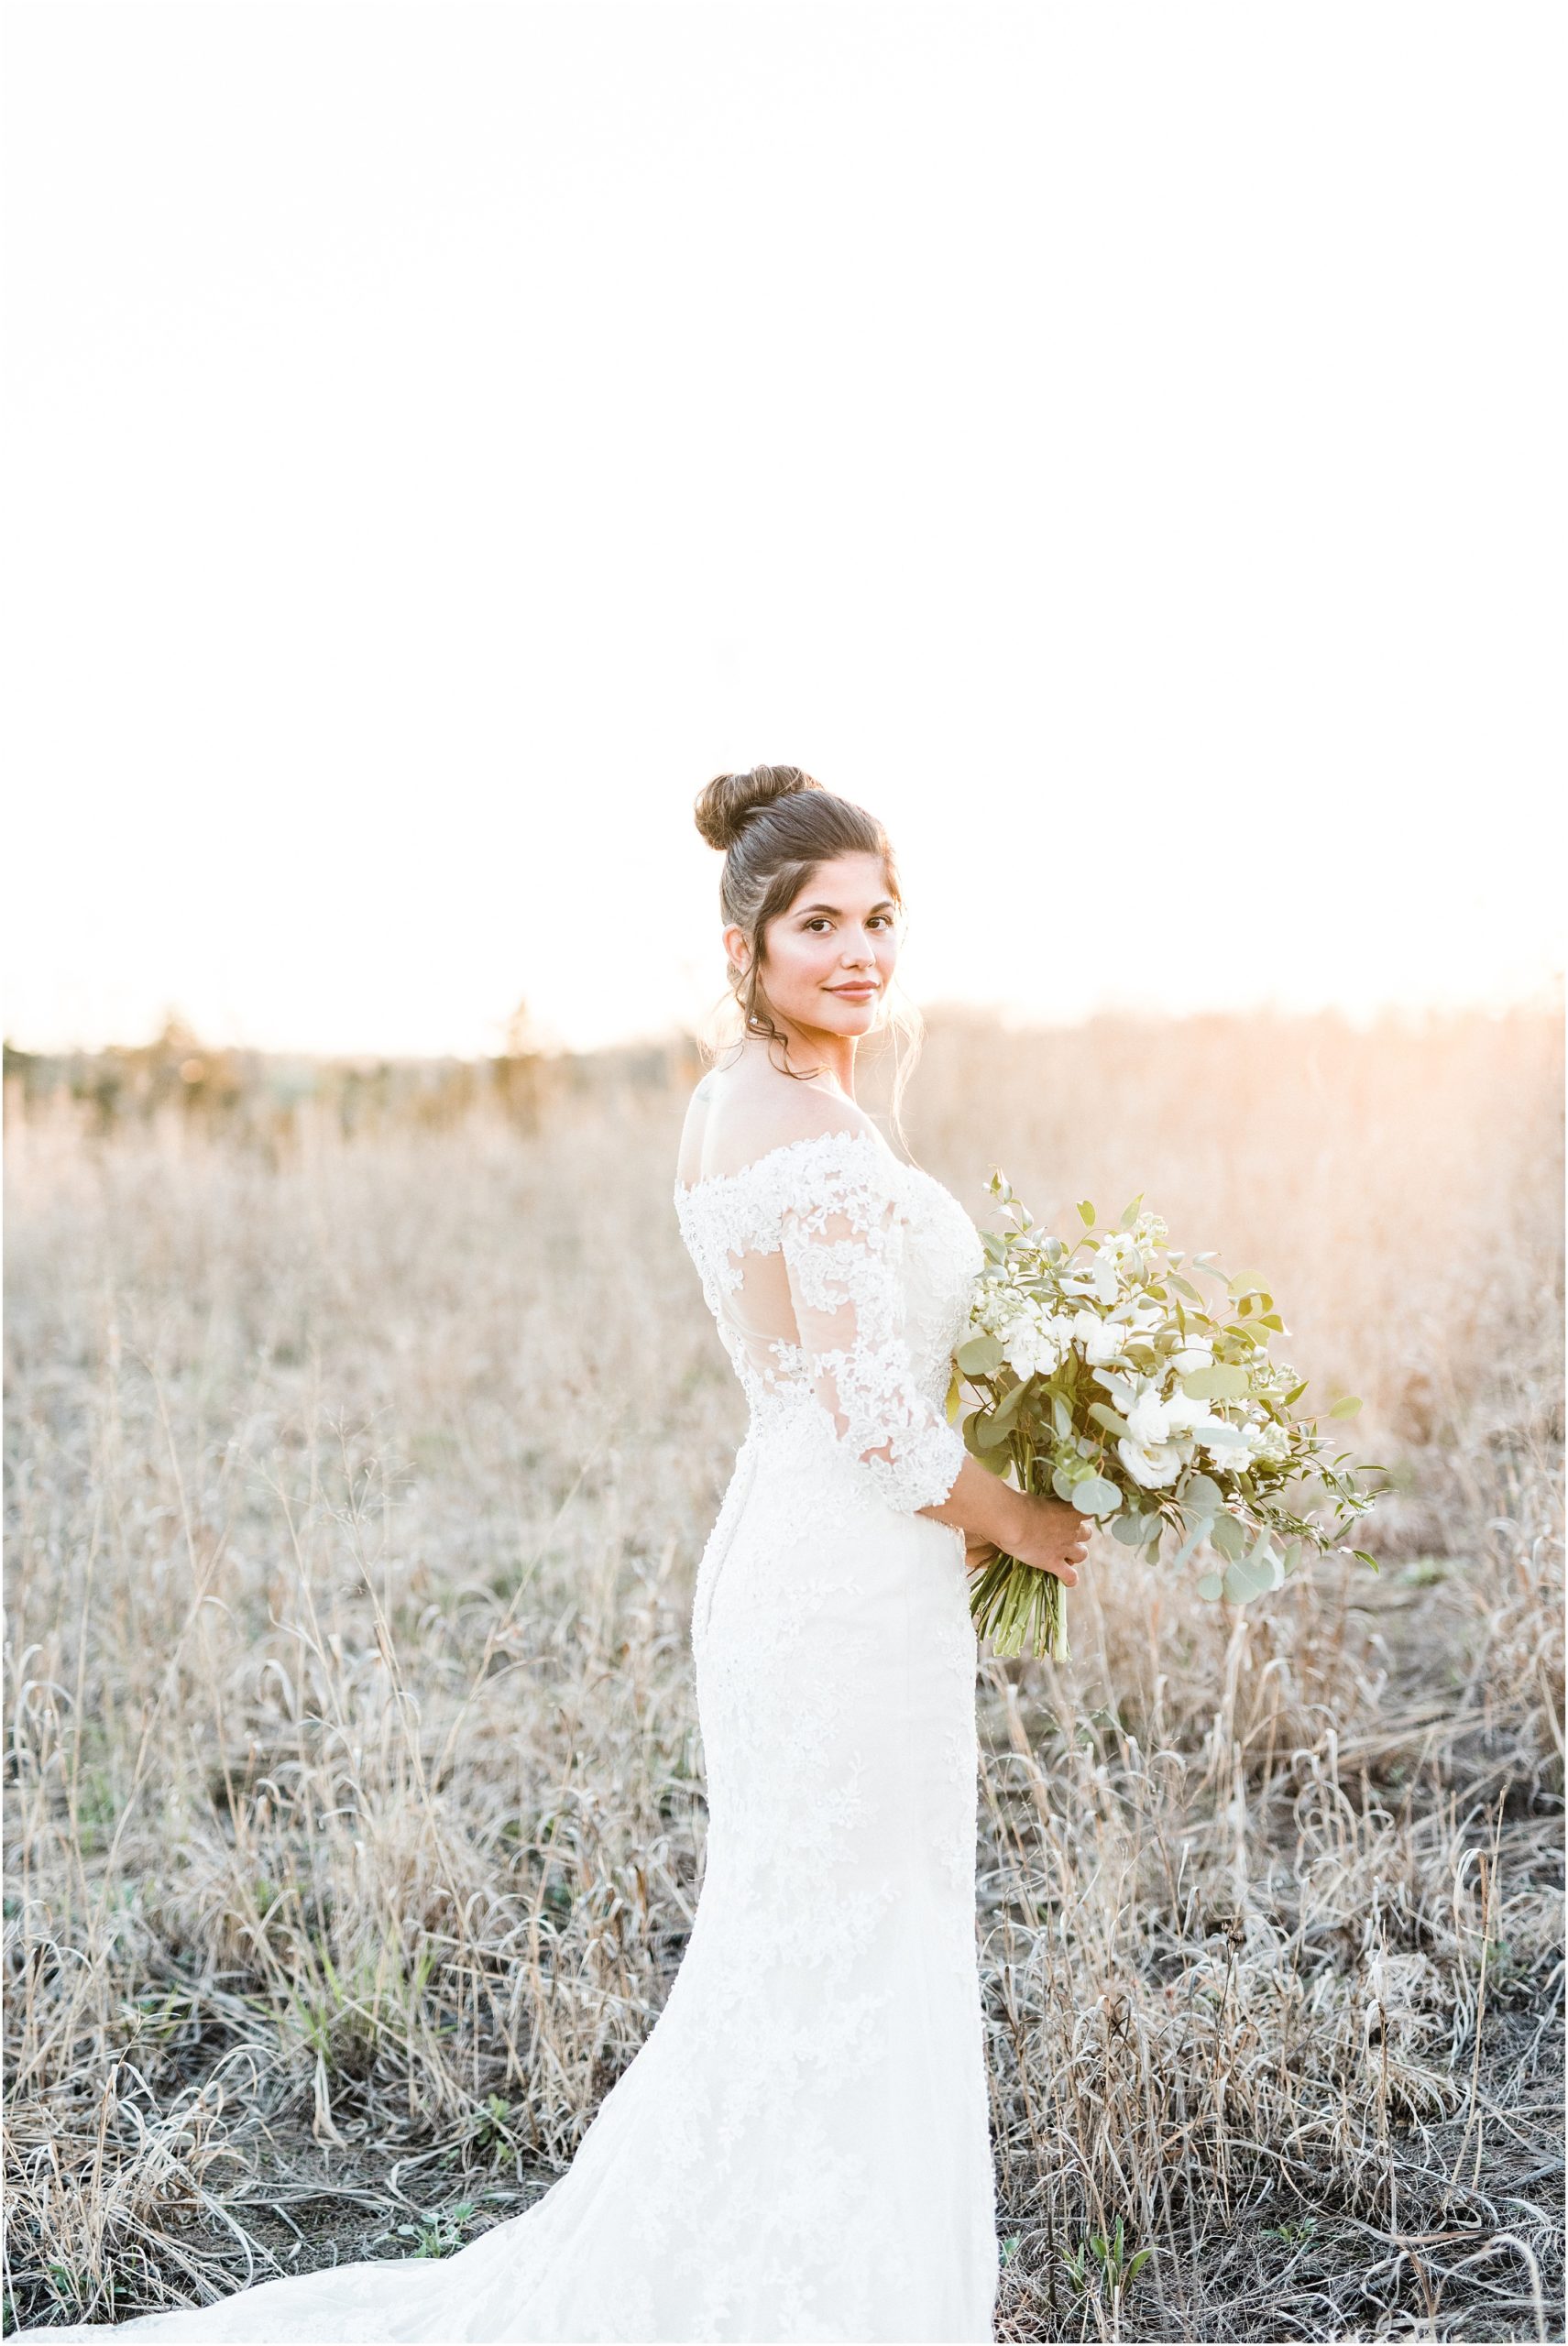 bride looking over shoulder during bridal session with sunset in background in field